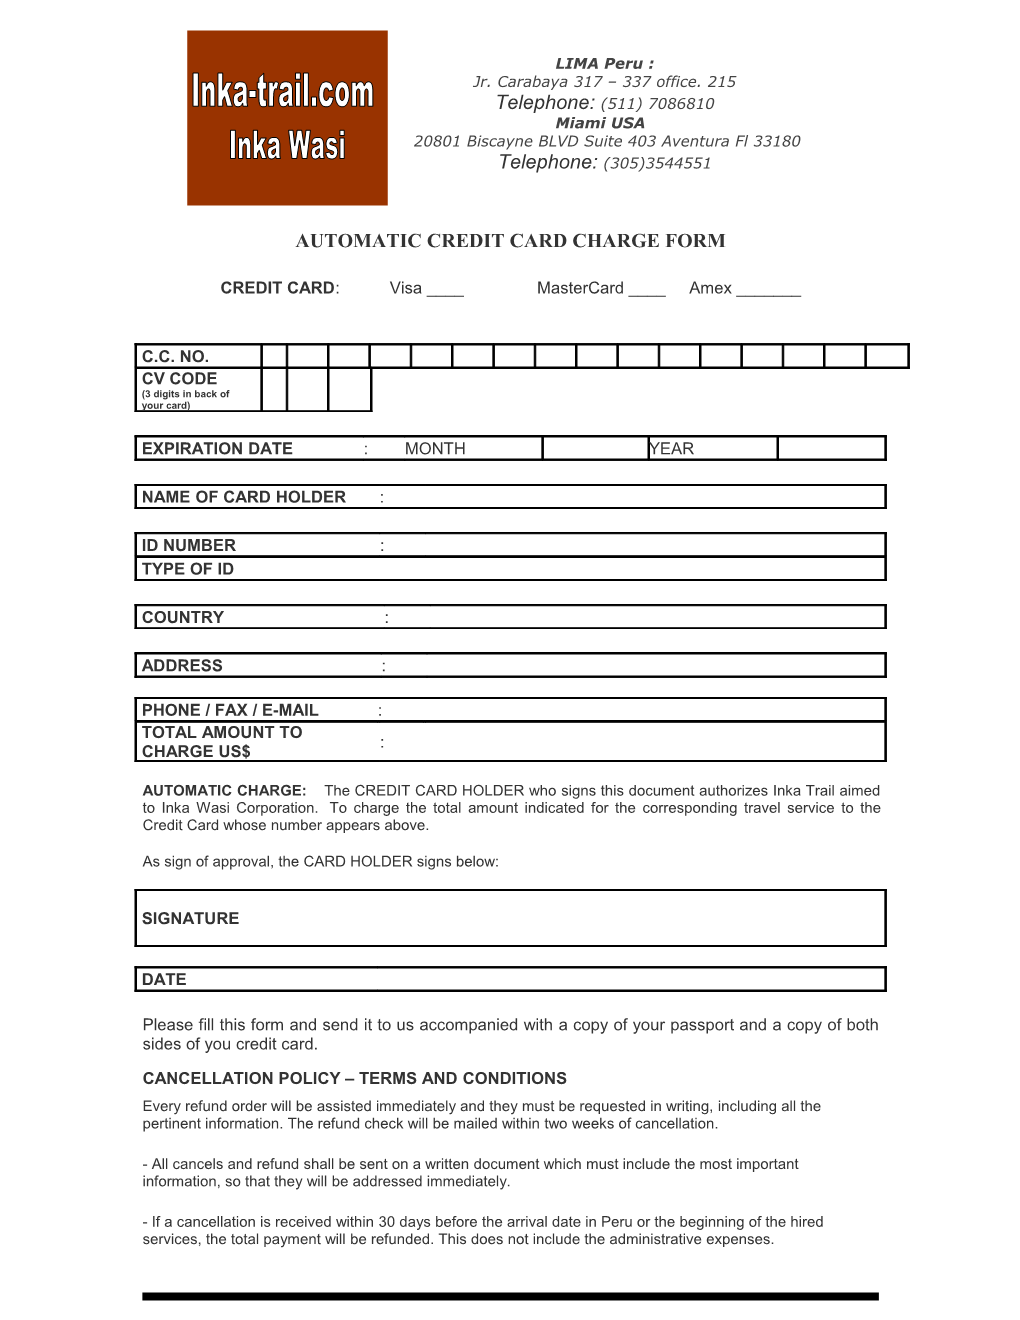 Automatic Credit Card Charge Form